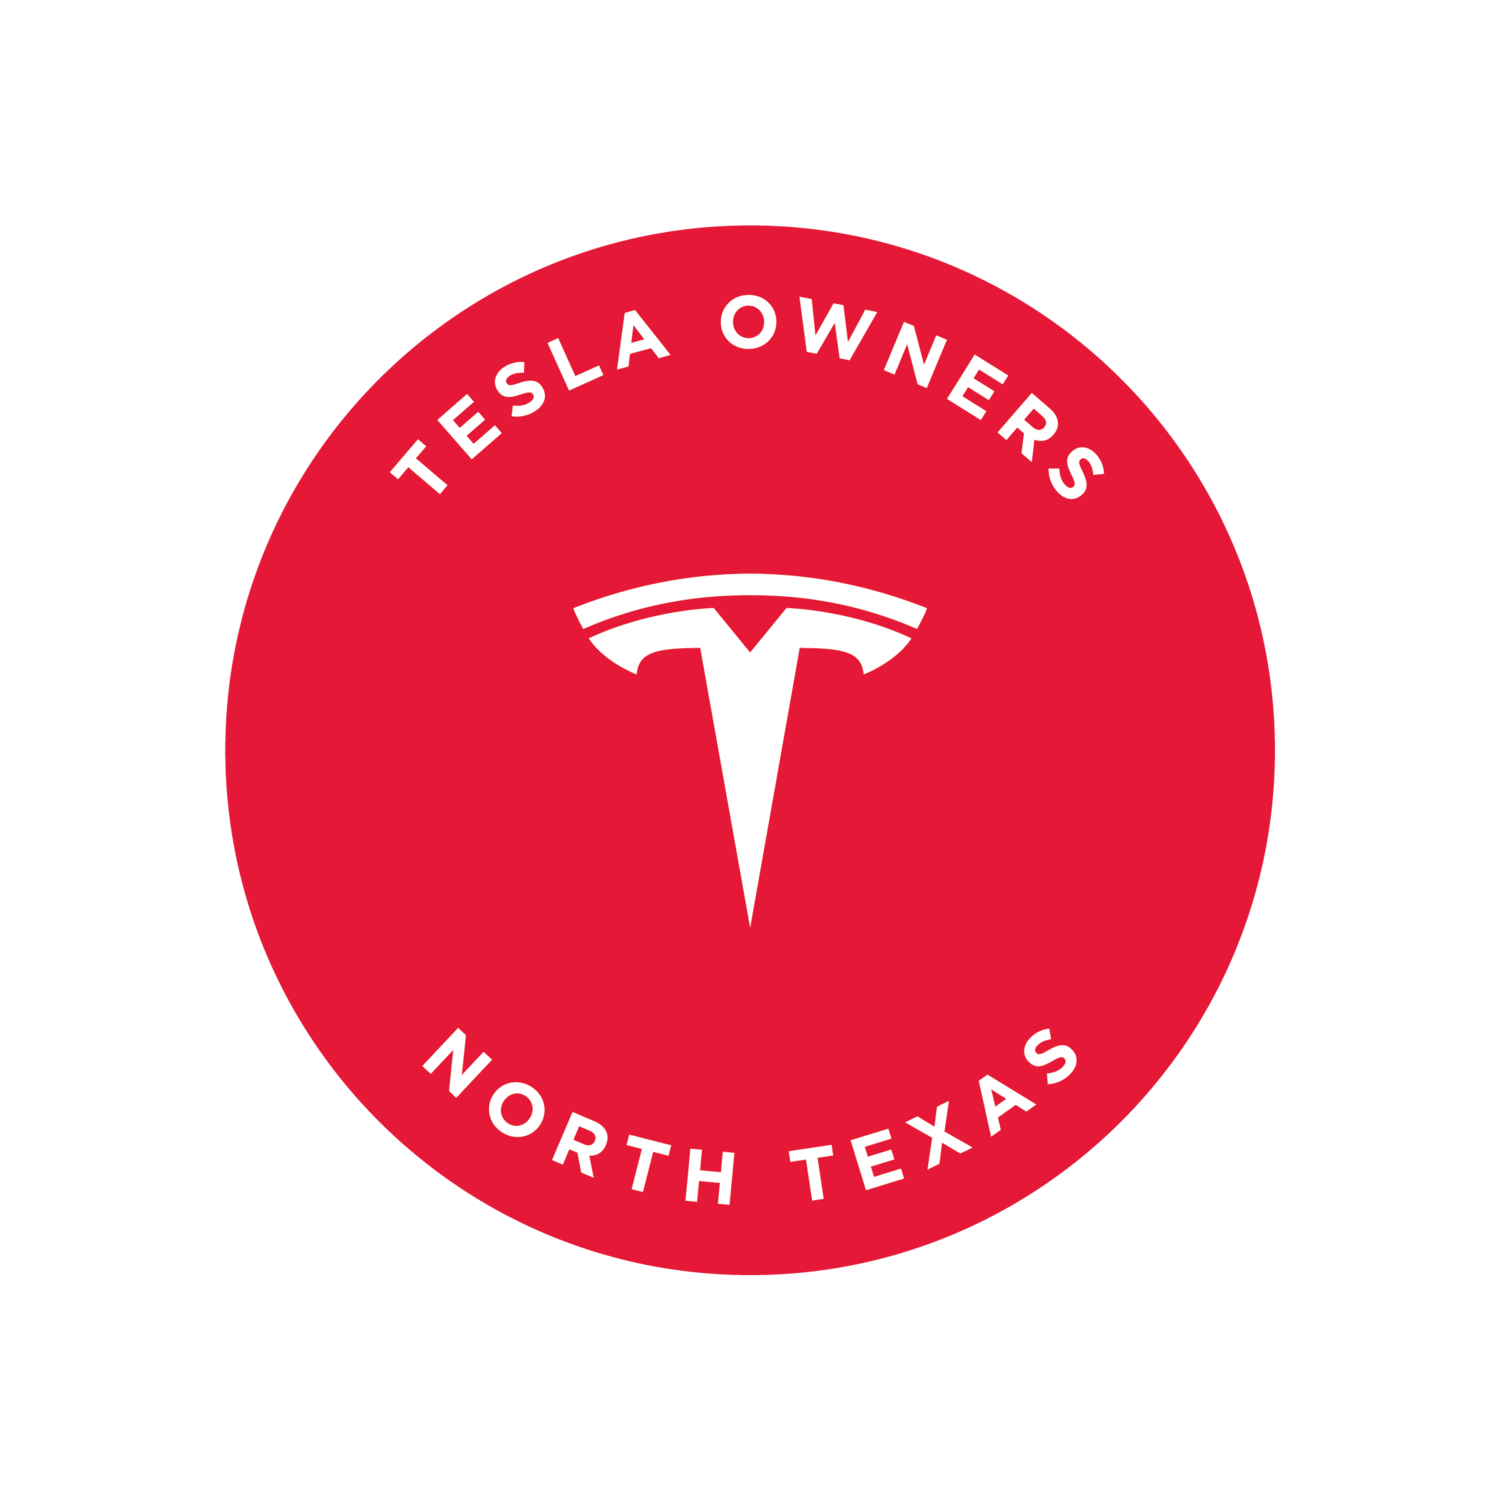 Tesla Owners Club of North Texas